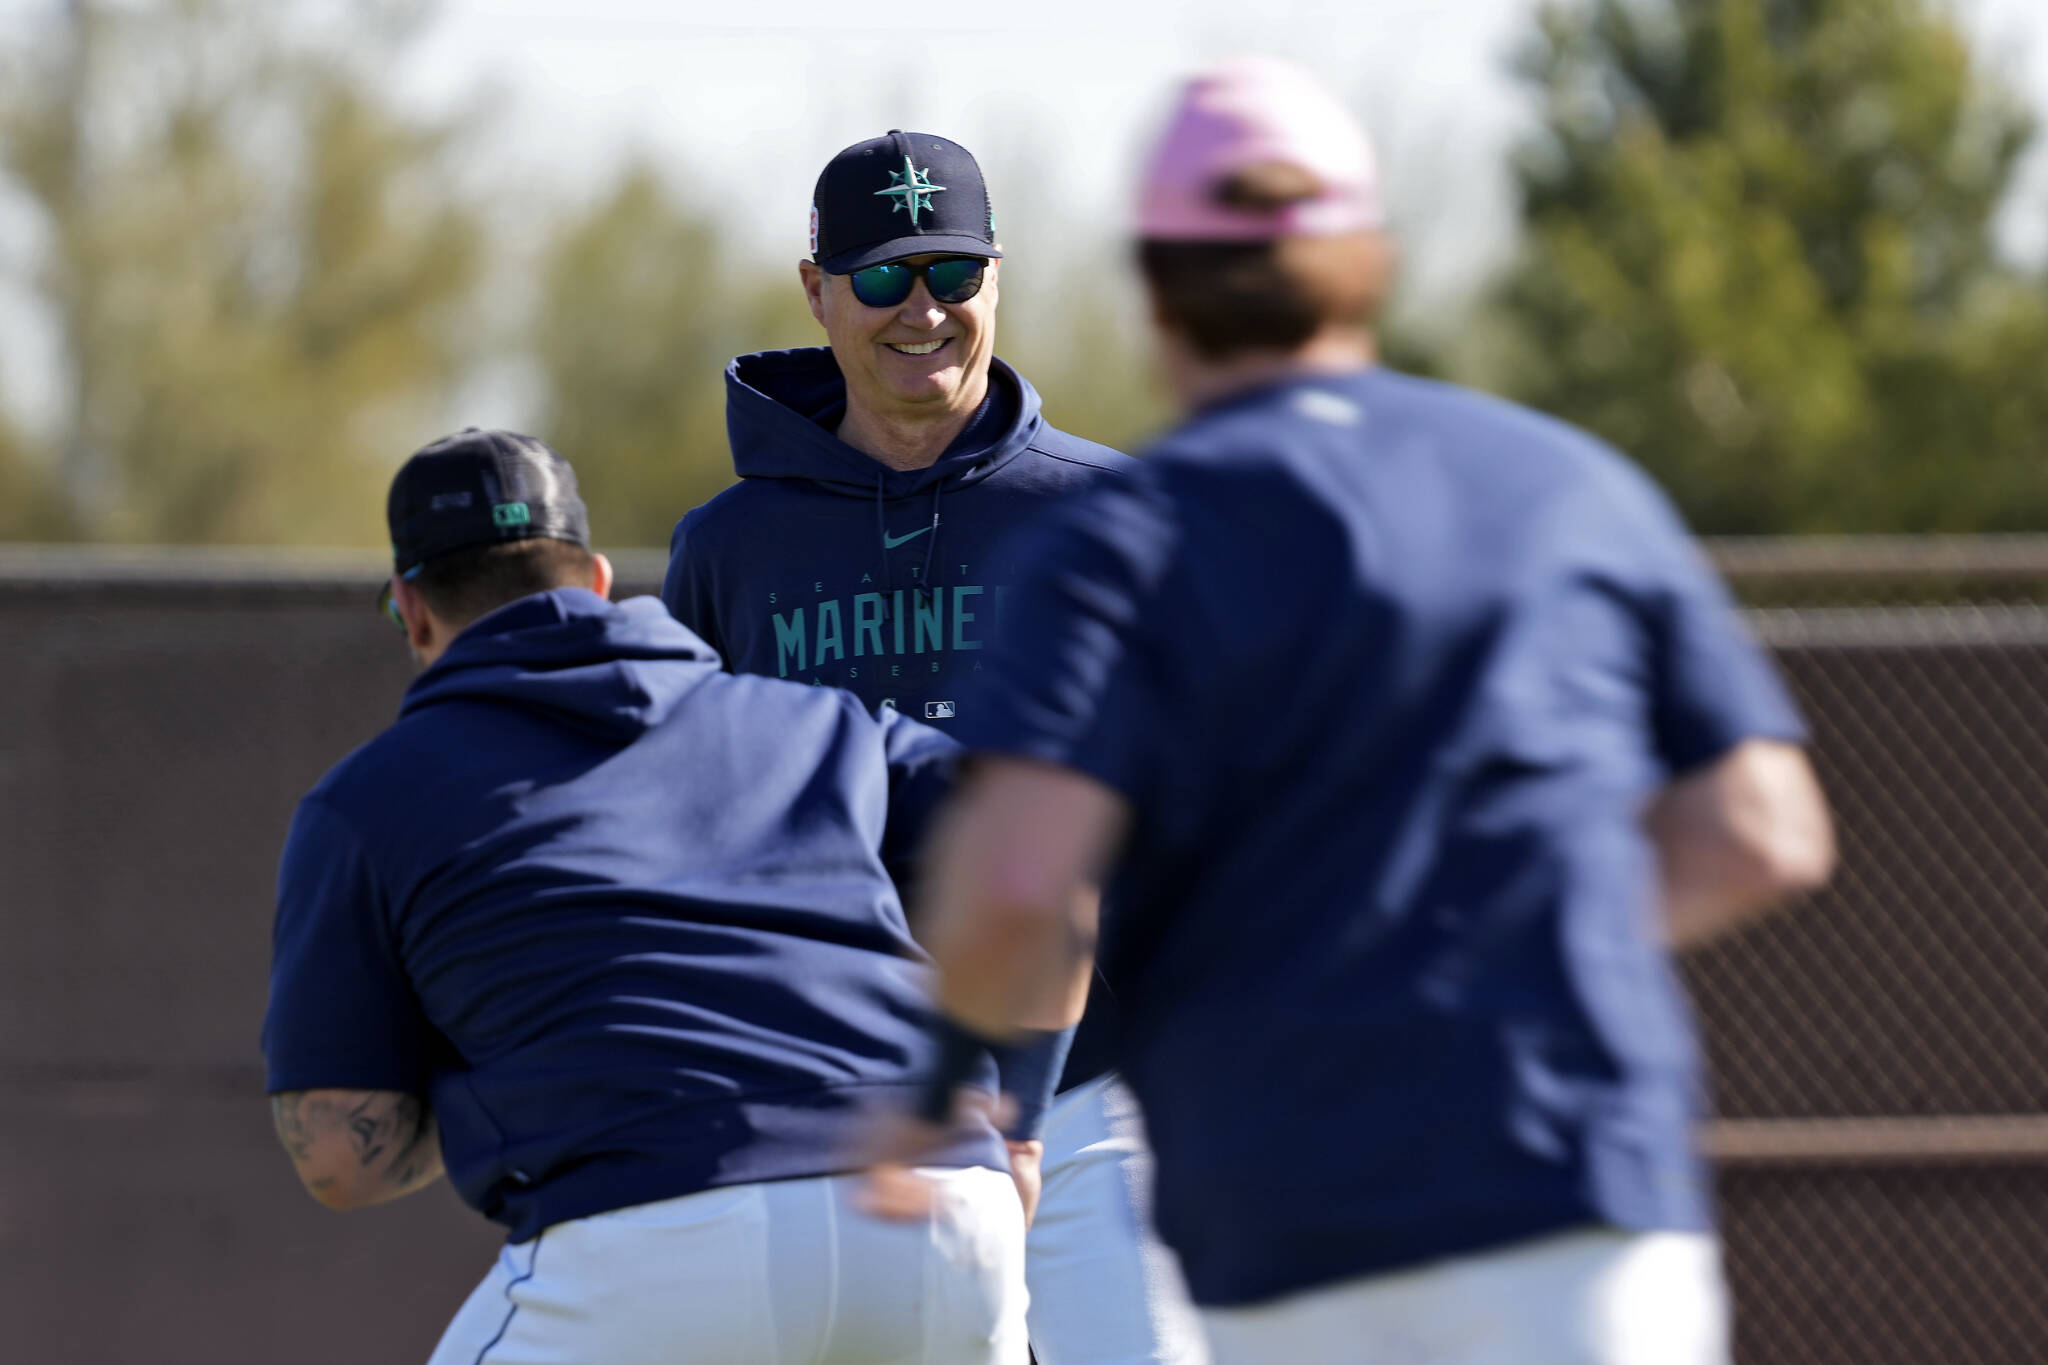 Mariners manager Scott Servais watches players warm up before a spring training practice this past Saturday in Peoria, Ariz. (AP Photo/Charlie Riedel)